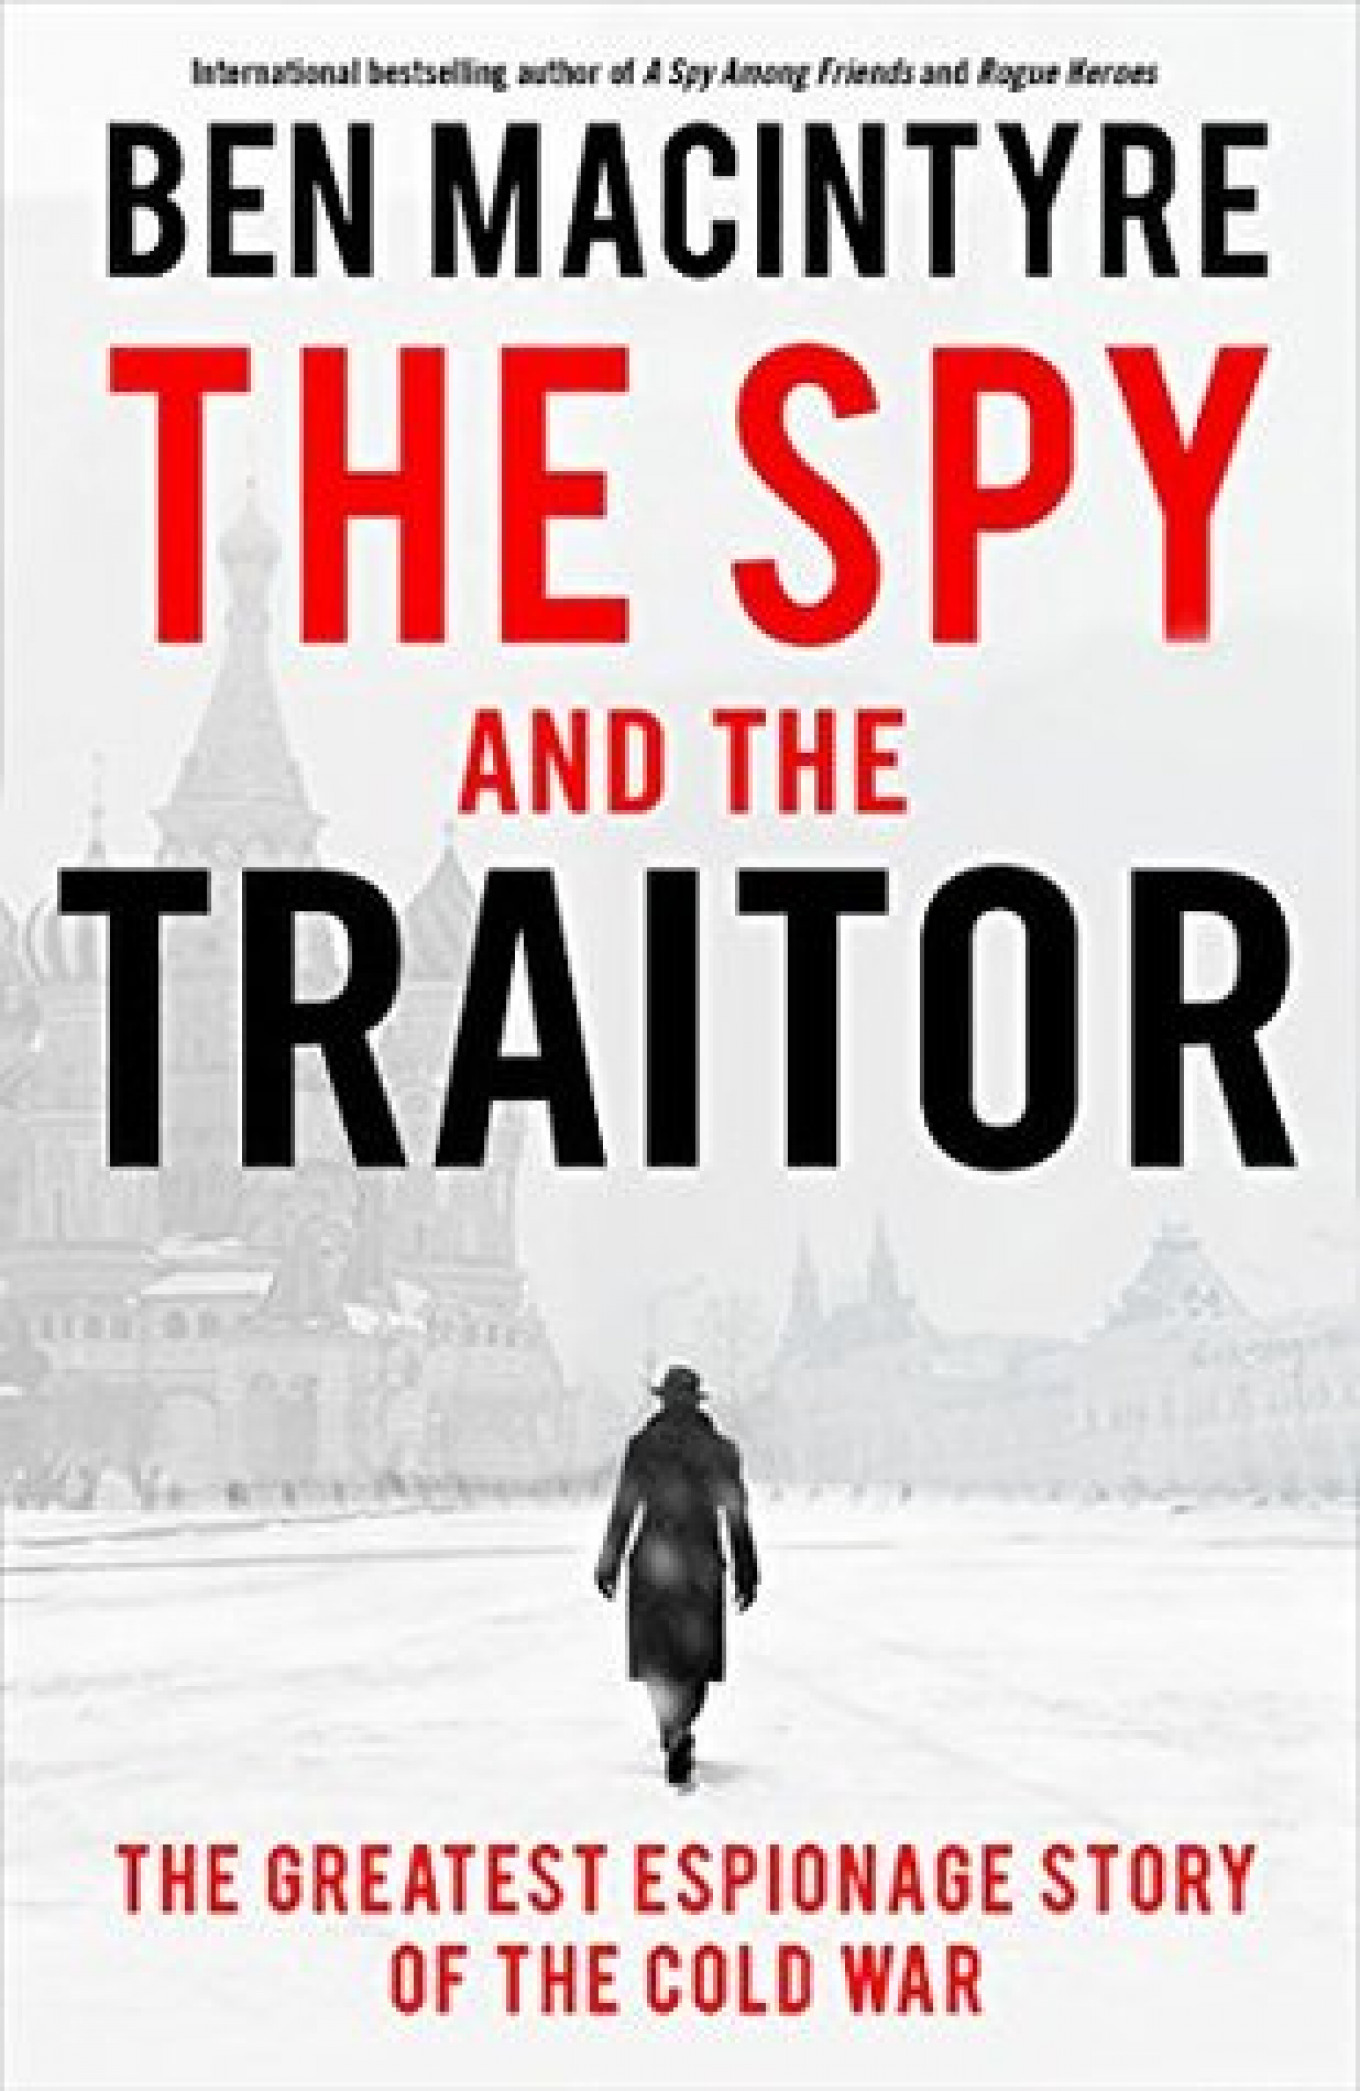 the spy and the traitor author